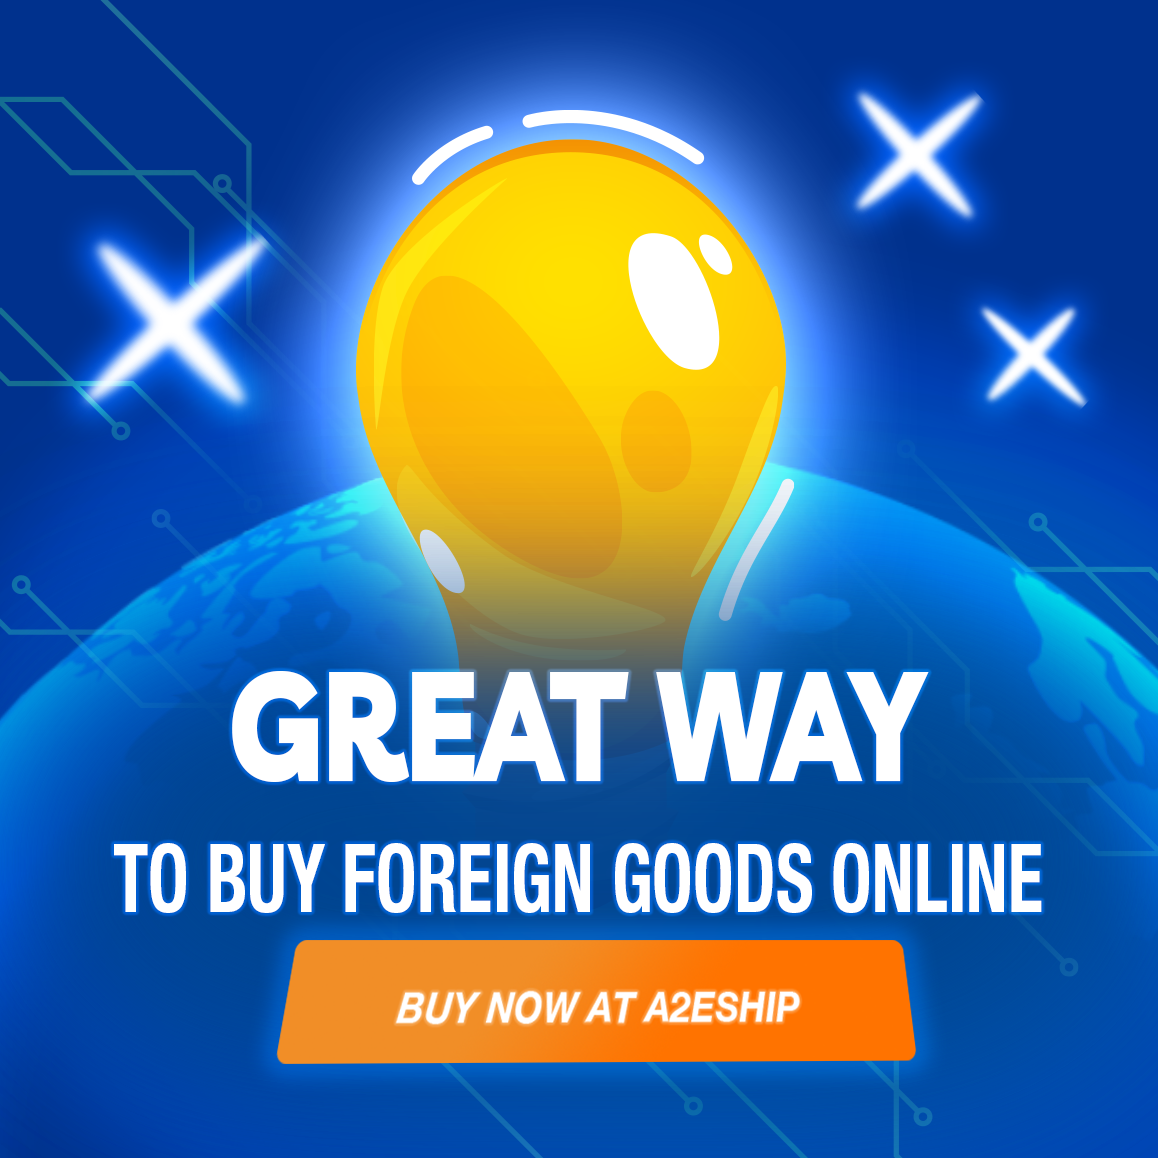 Great ways to buy foreign goods online